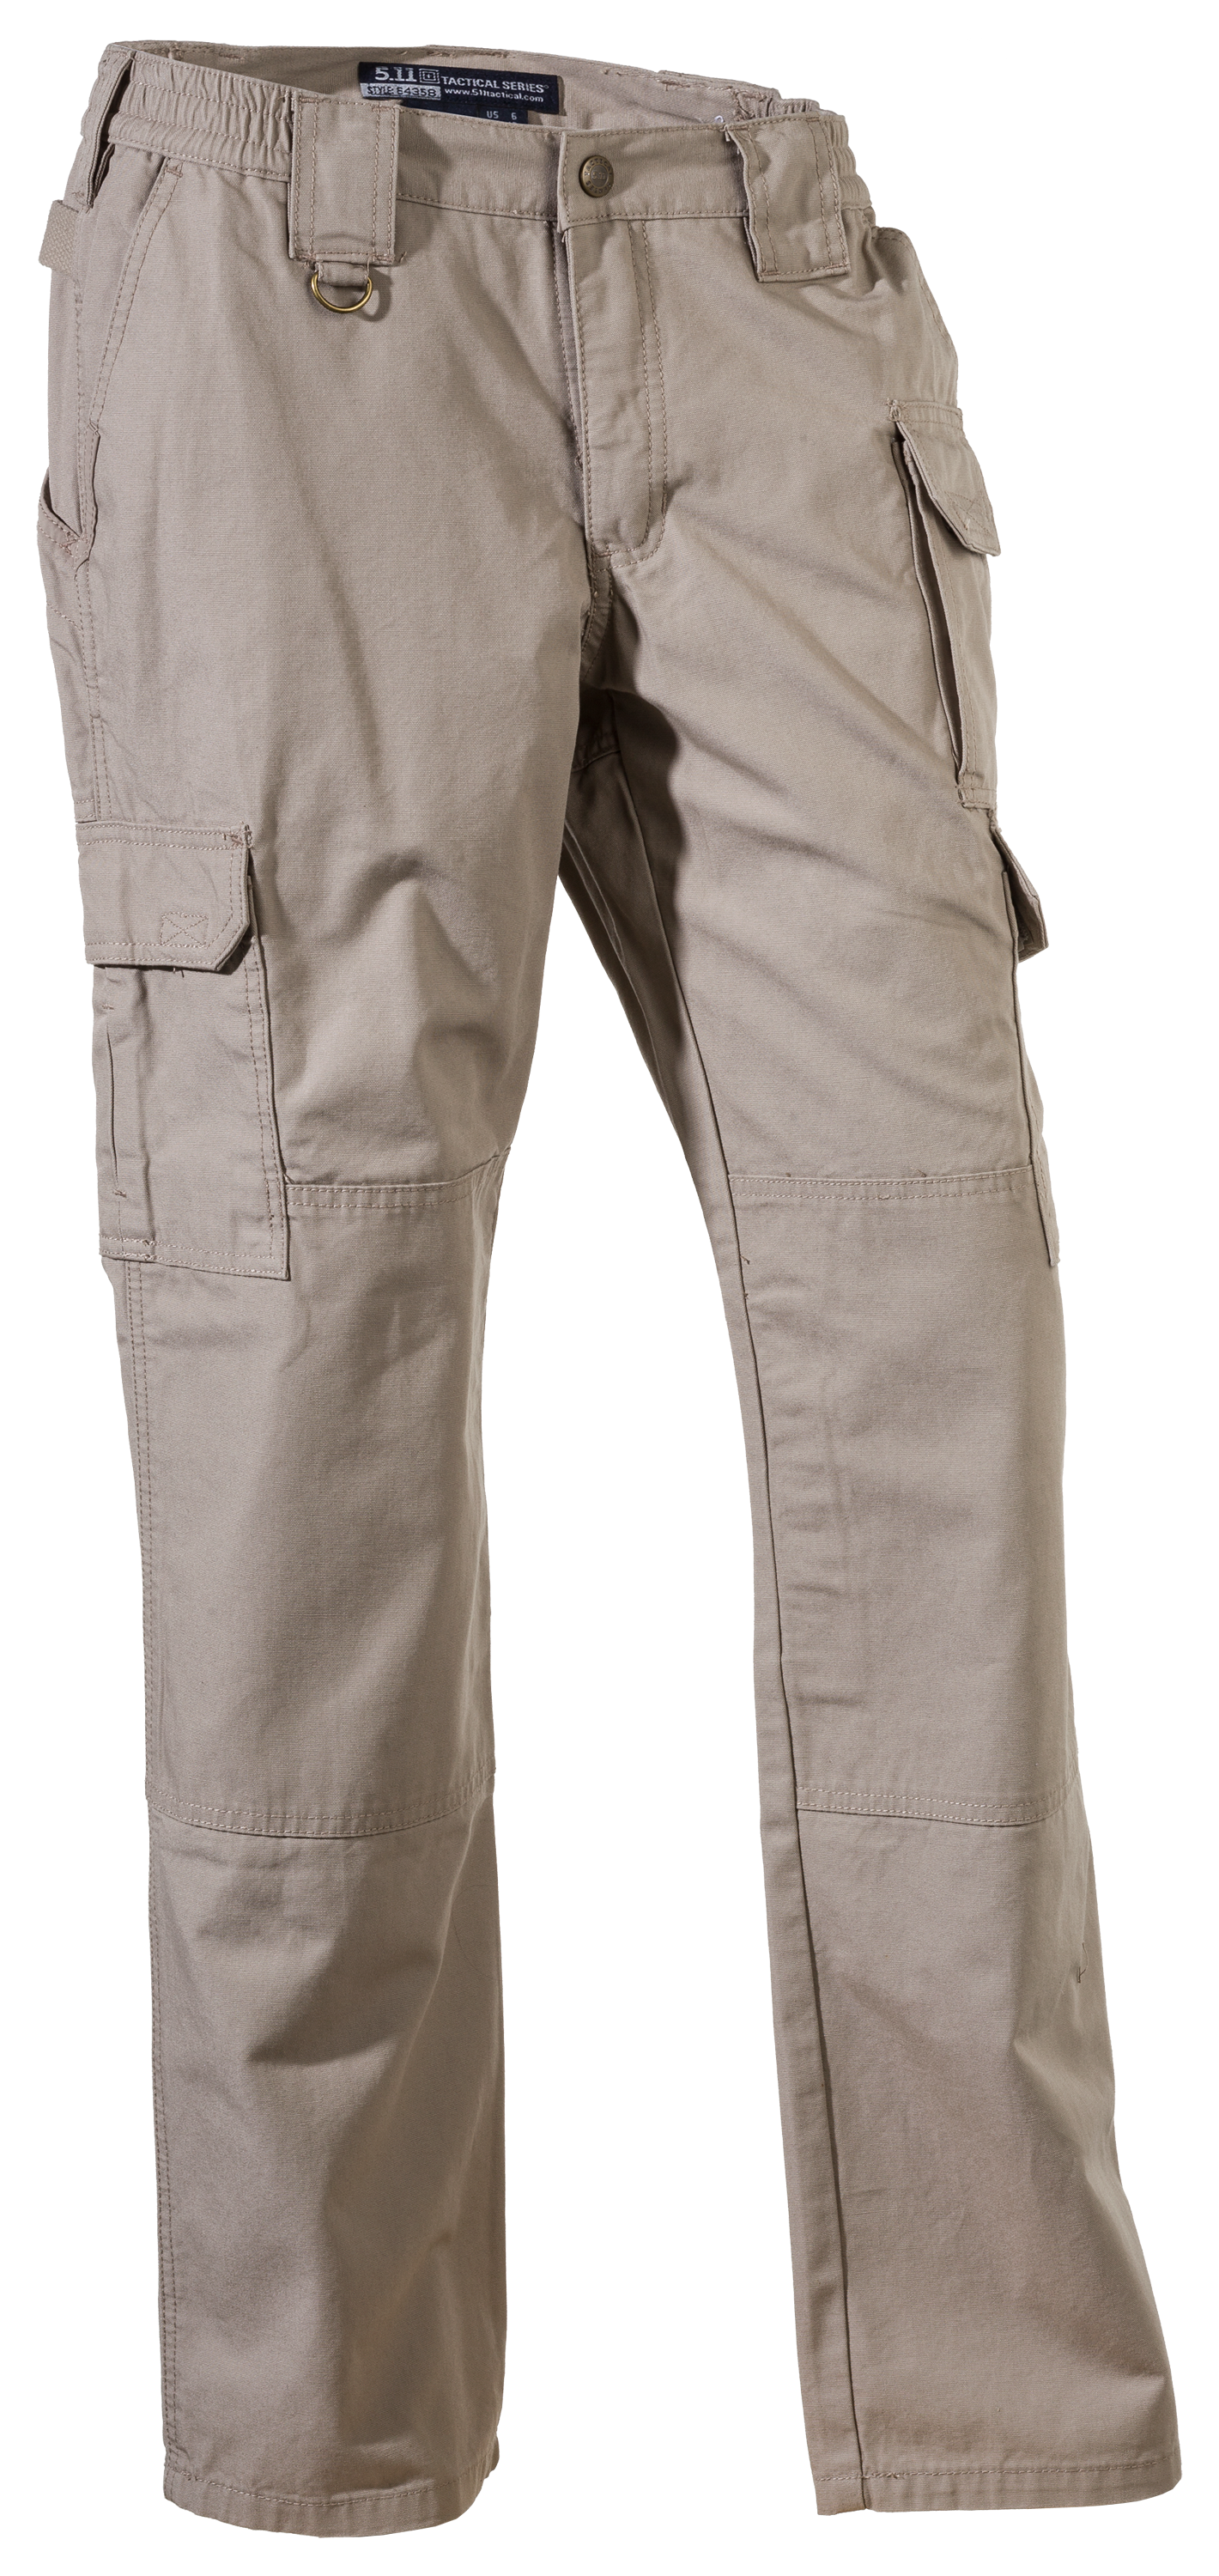 Tactical Pants for Ladies | Cabela's